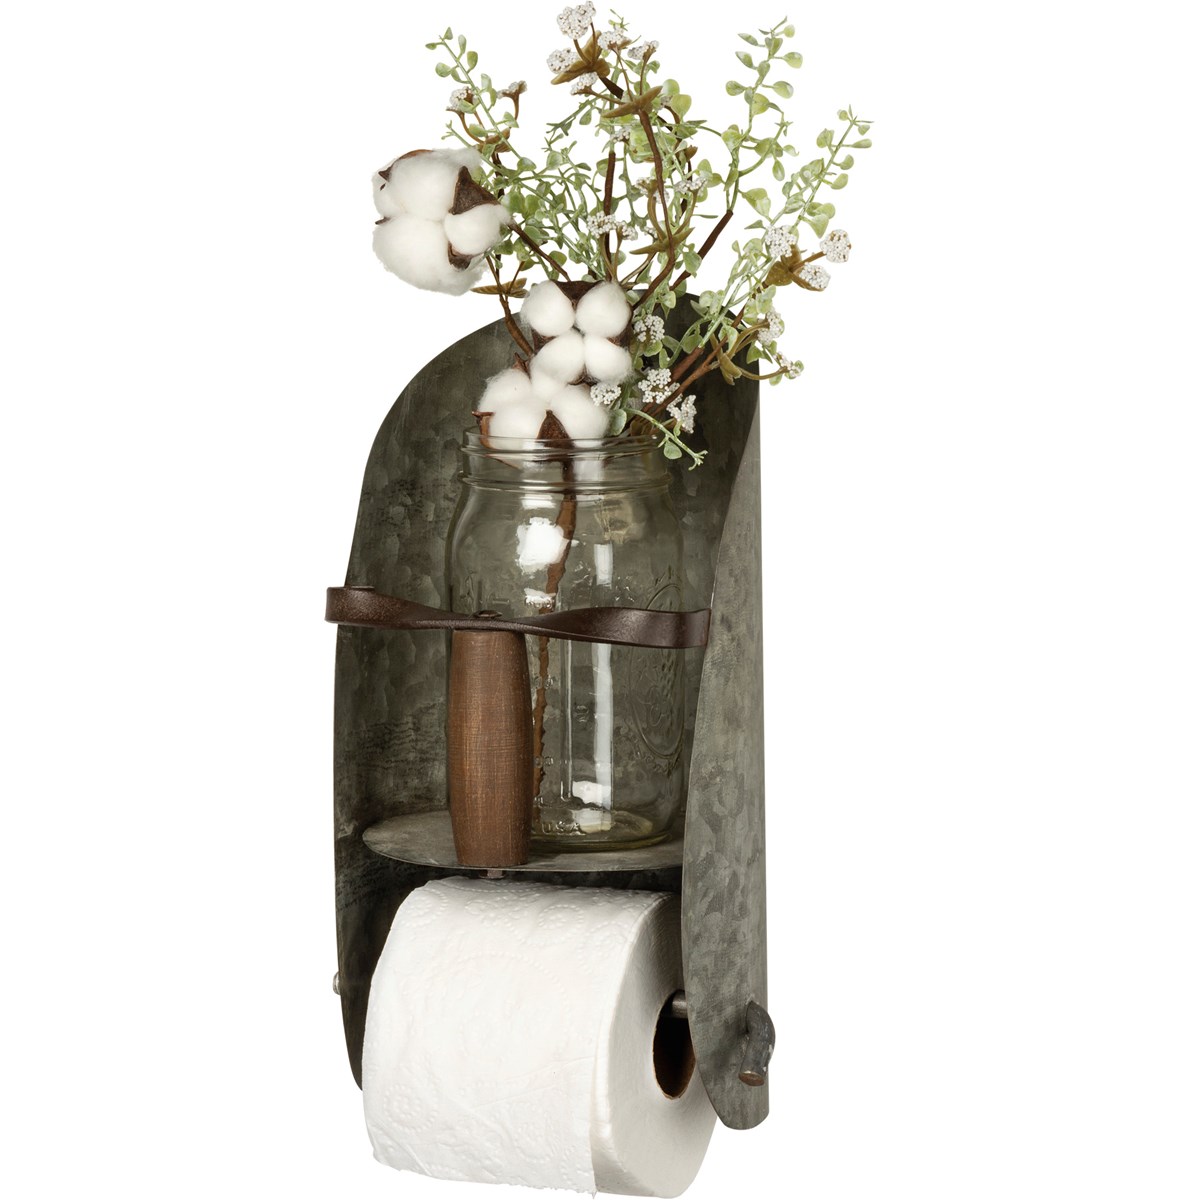 The Toilet Paper Holder - An Unexpected Source Of Beauty In The